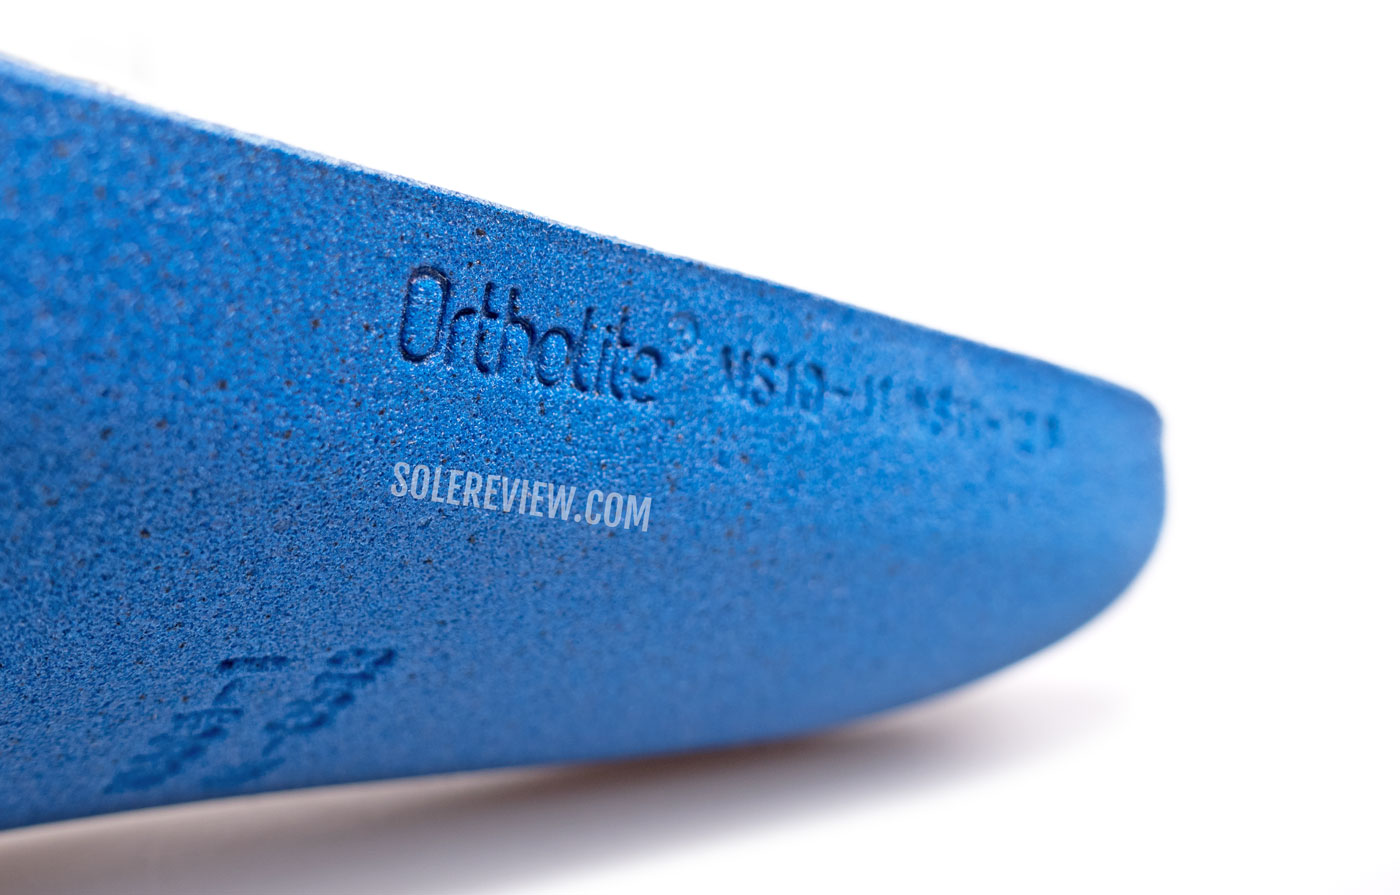 The removable Ortholite insole of the Hoka Clifton 8.